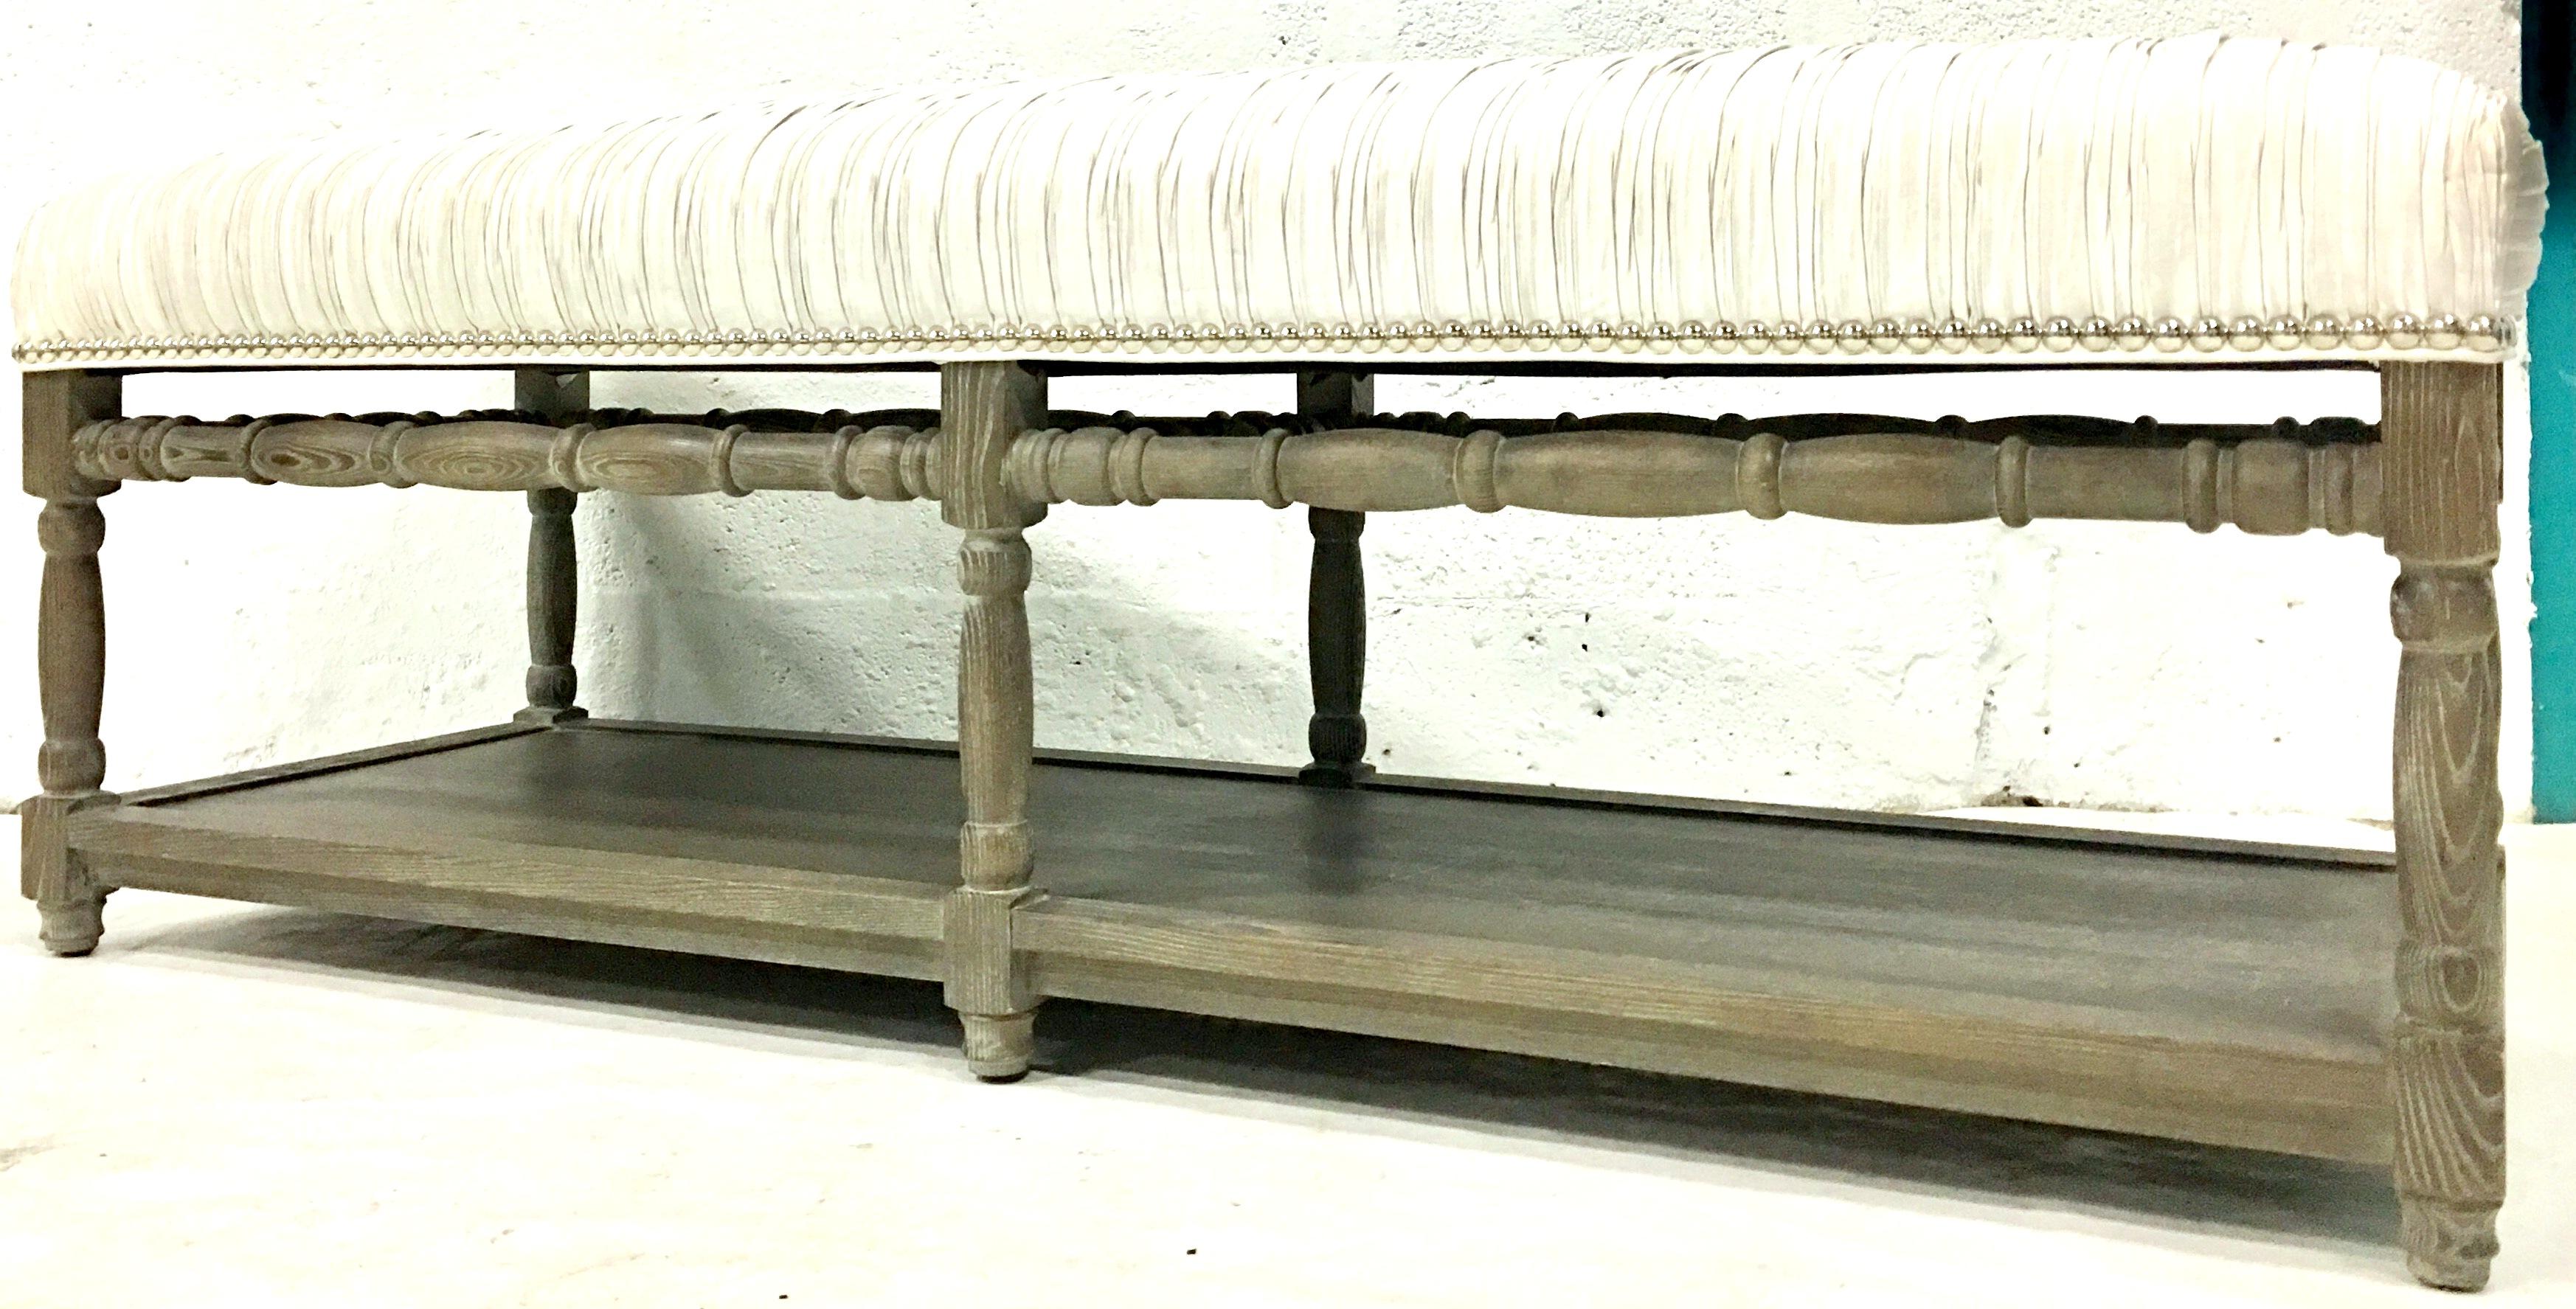 21st century modern cerused wood custom upholstered silver metallic silk bench. This new bench features a cerused driftwood wash finish with new upholstery grade 